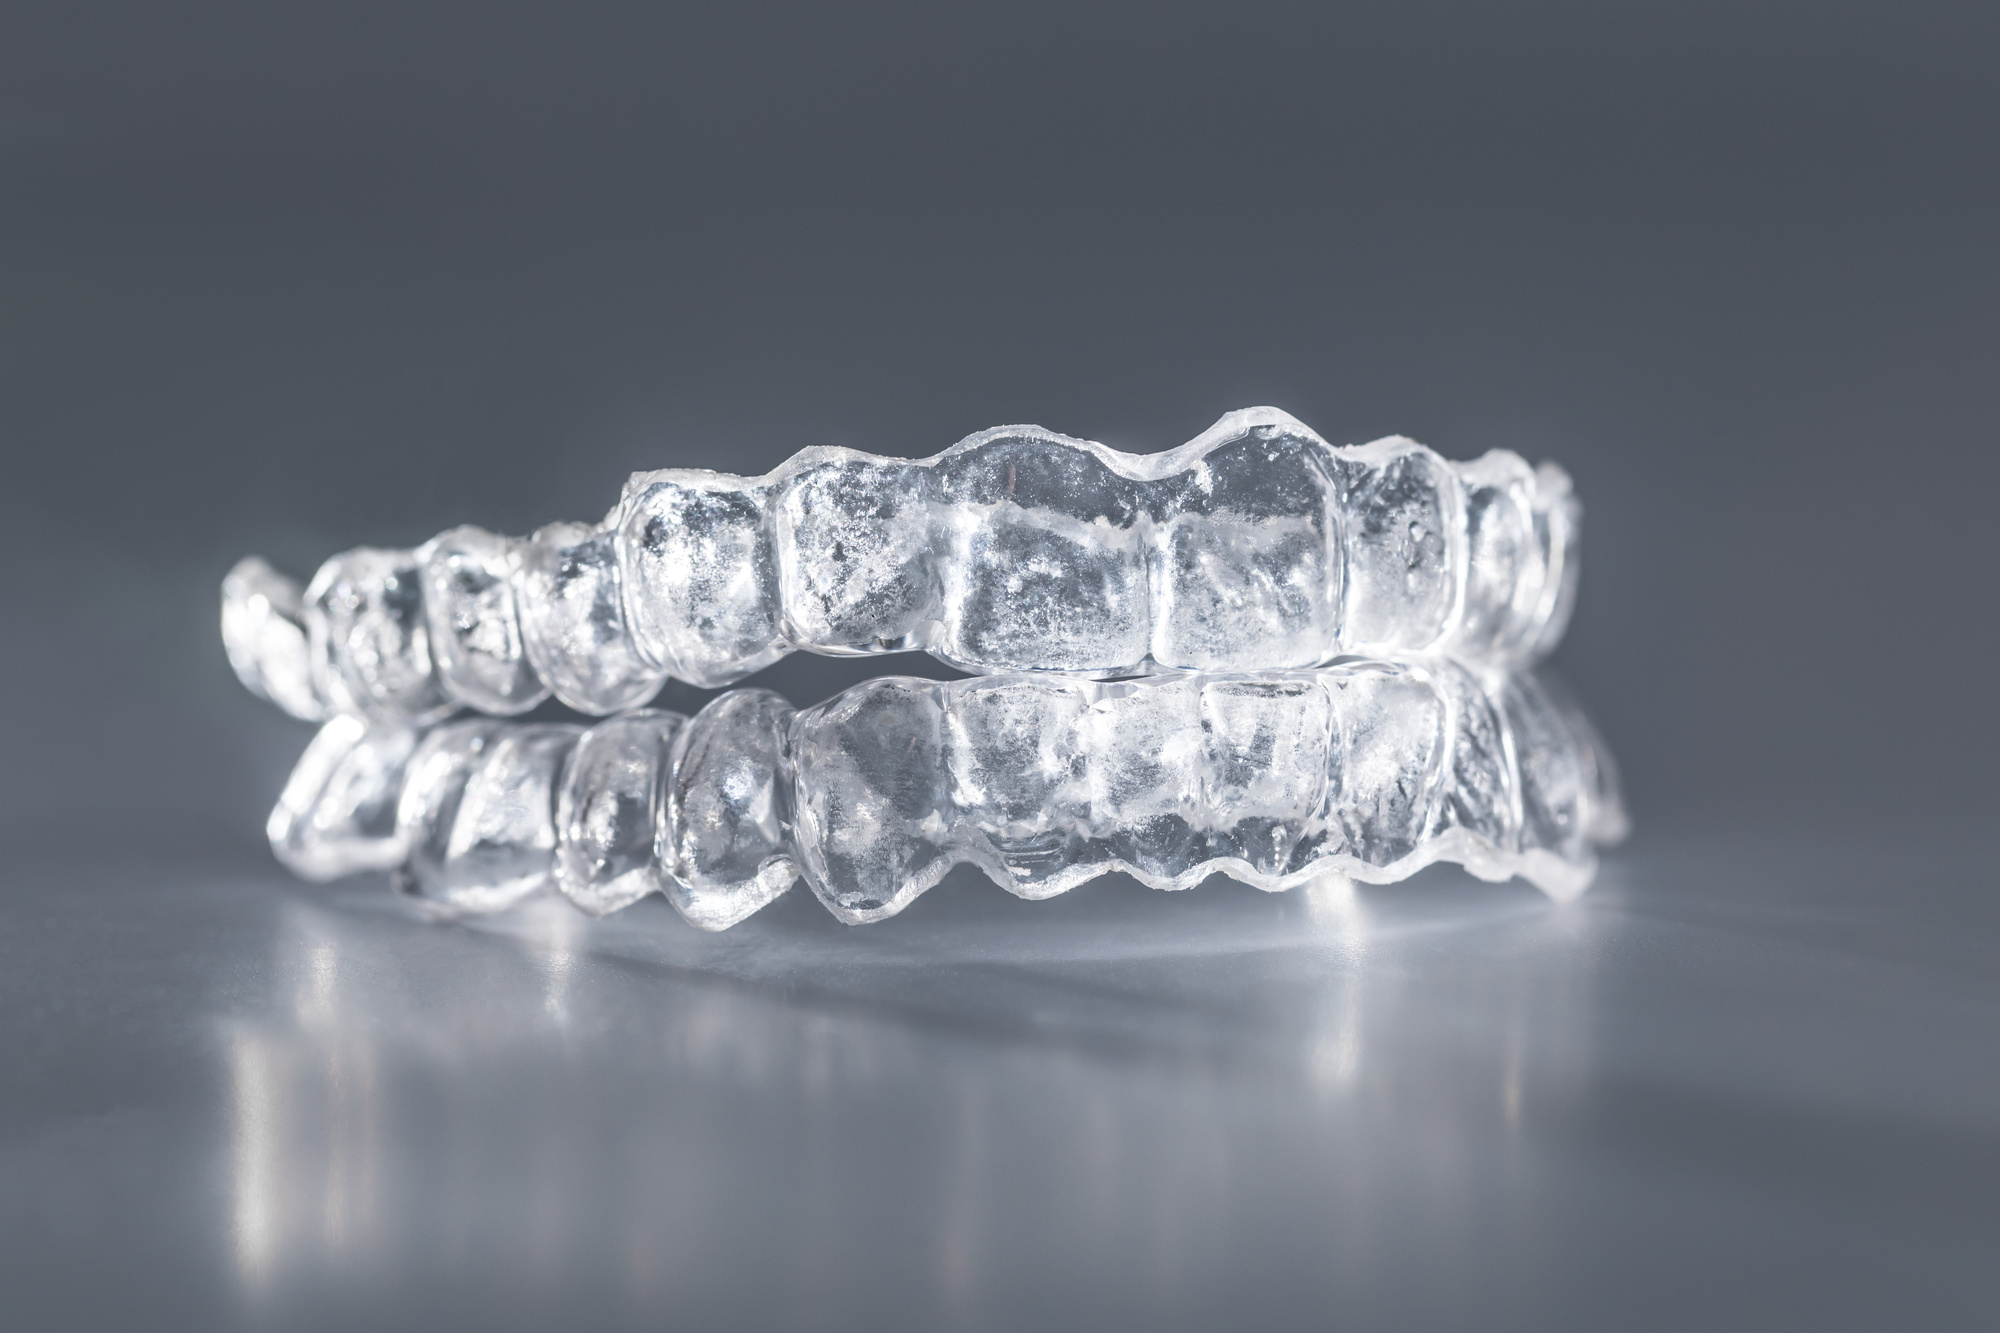 7 Simple Tips for Life with Invisalign Aligners